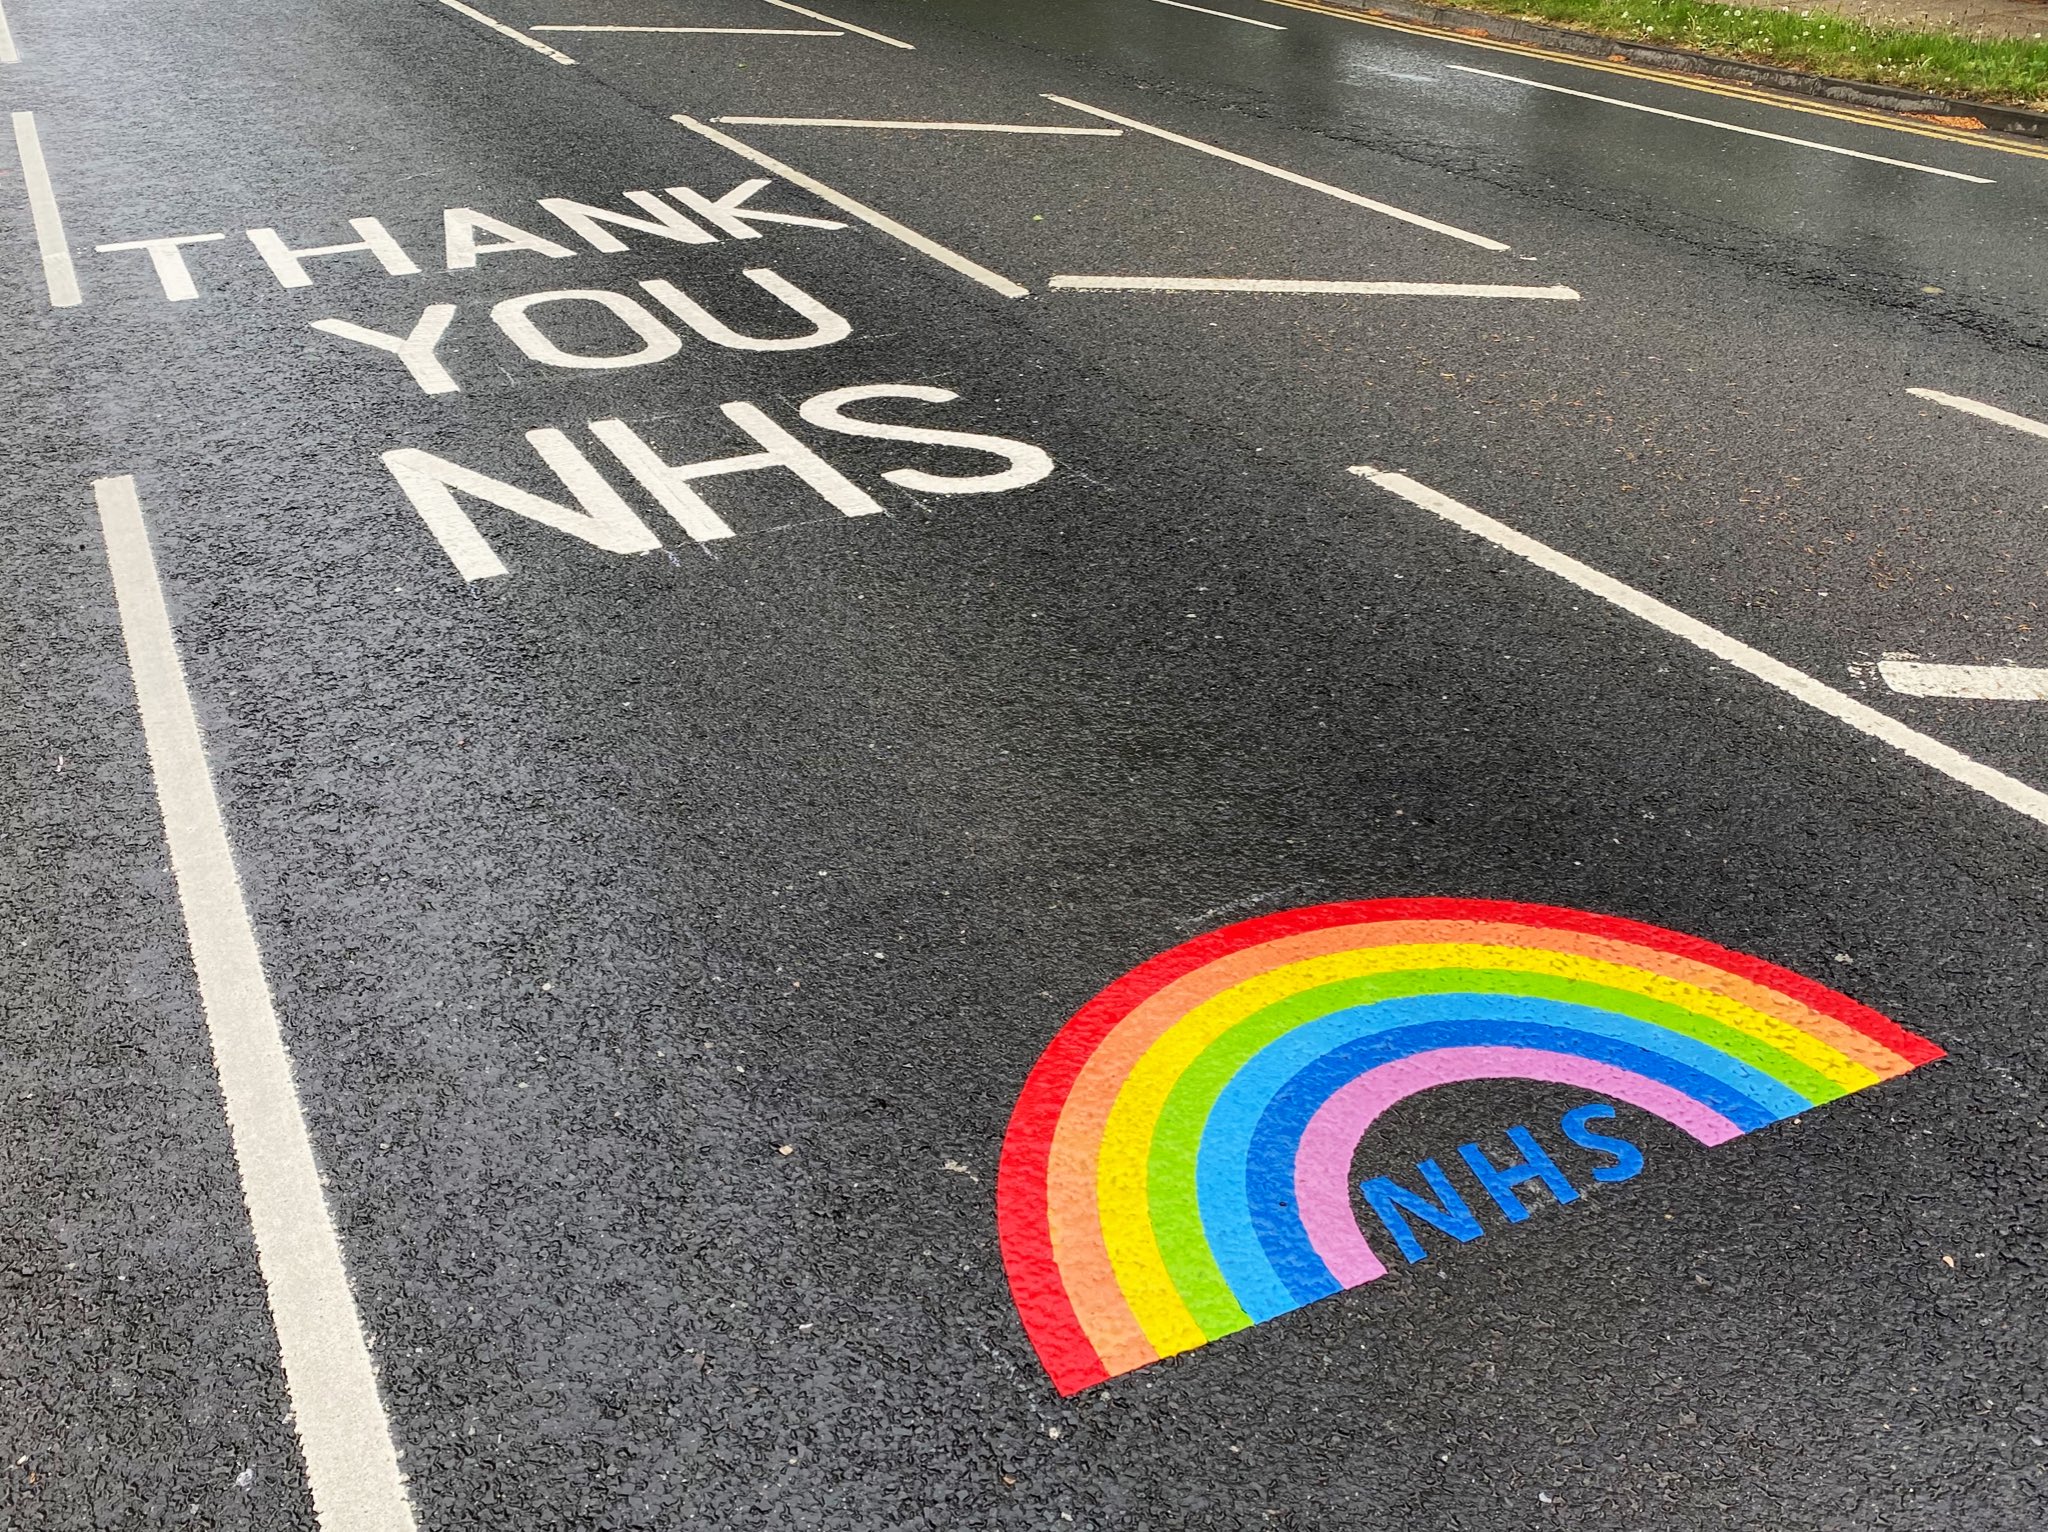 Rainbow Scheme provides 10,000 free and discounted holidays for NHS workers